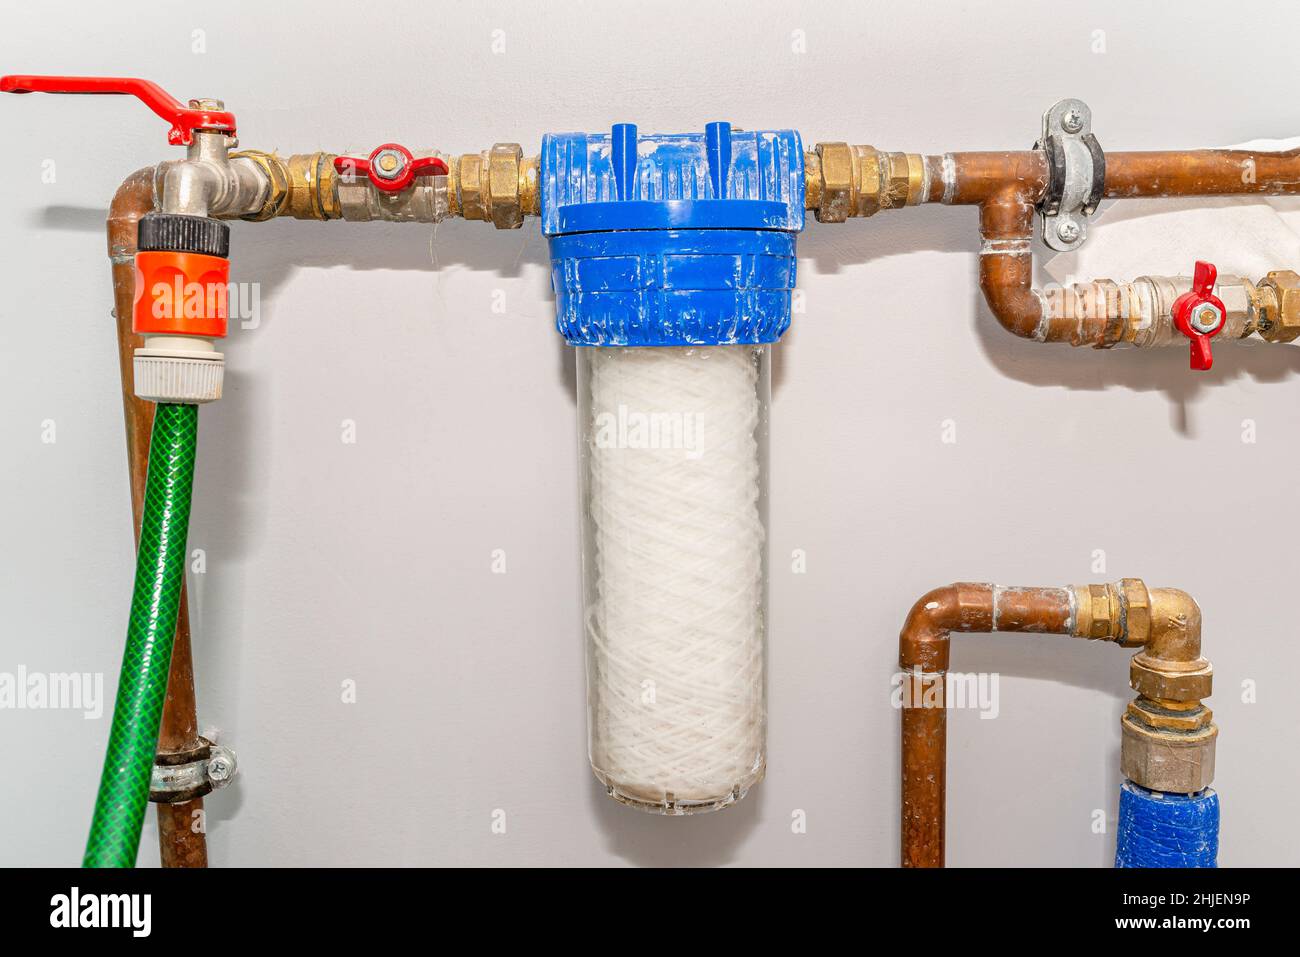 New 20 micron water string cartridge placed in front of the main water intake in the house. Stock Photo